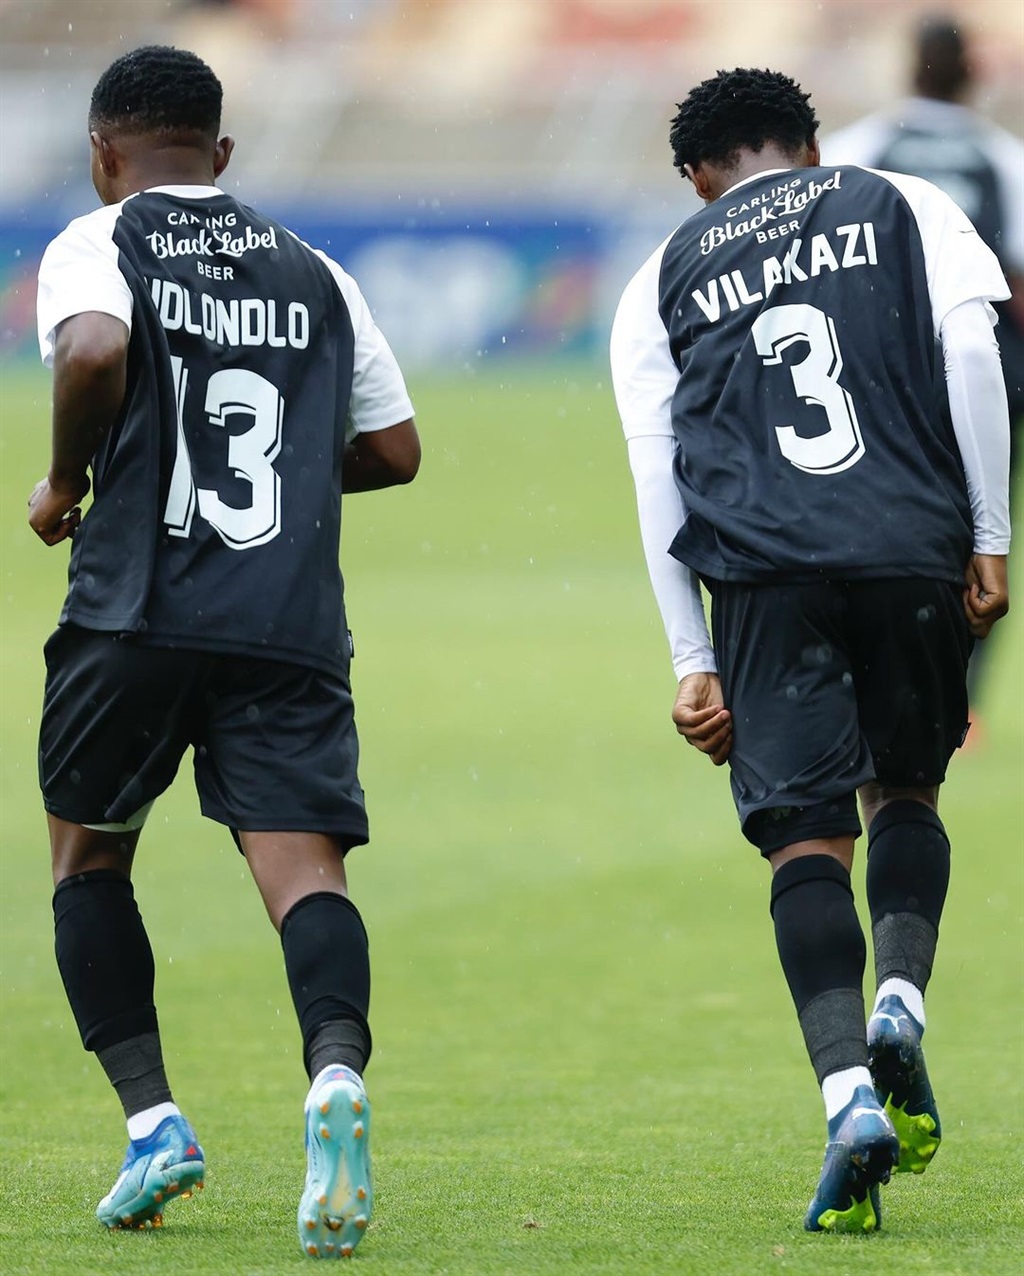 Kaizer Chiefs youngster Mfundo Vilakazi posted his